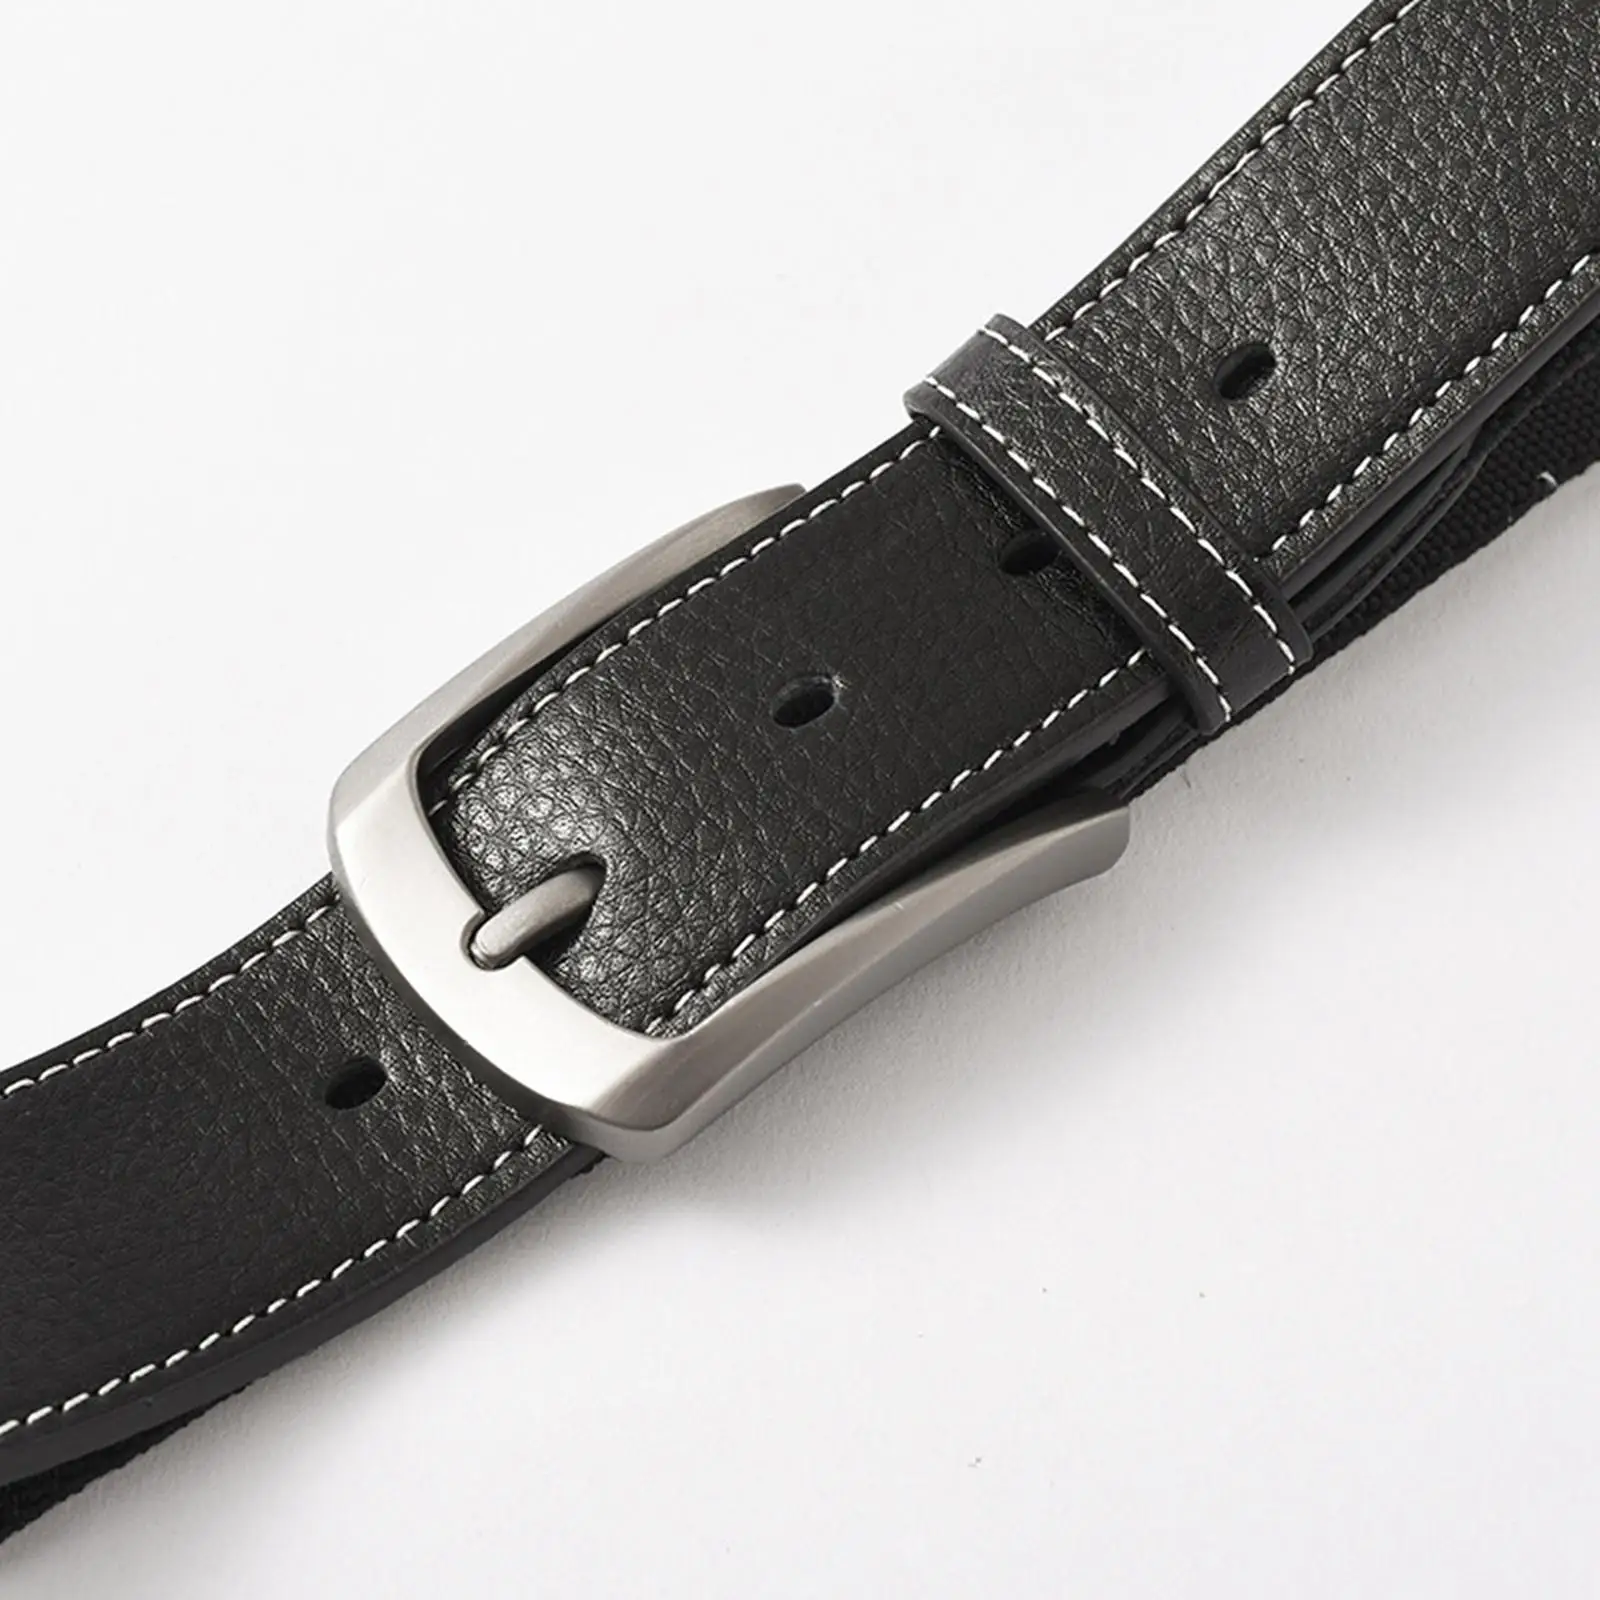 Men Belts Black Lightweight Versatile Stylish Casual 43inch Length Pin Buckle Waist Band for Street Pants Wedding Party Cosplay